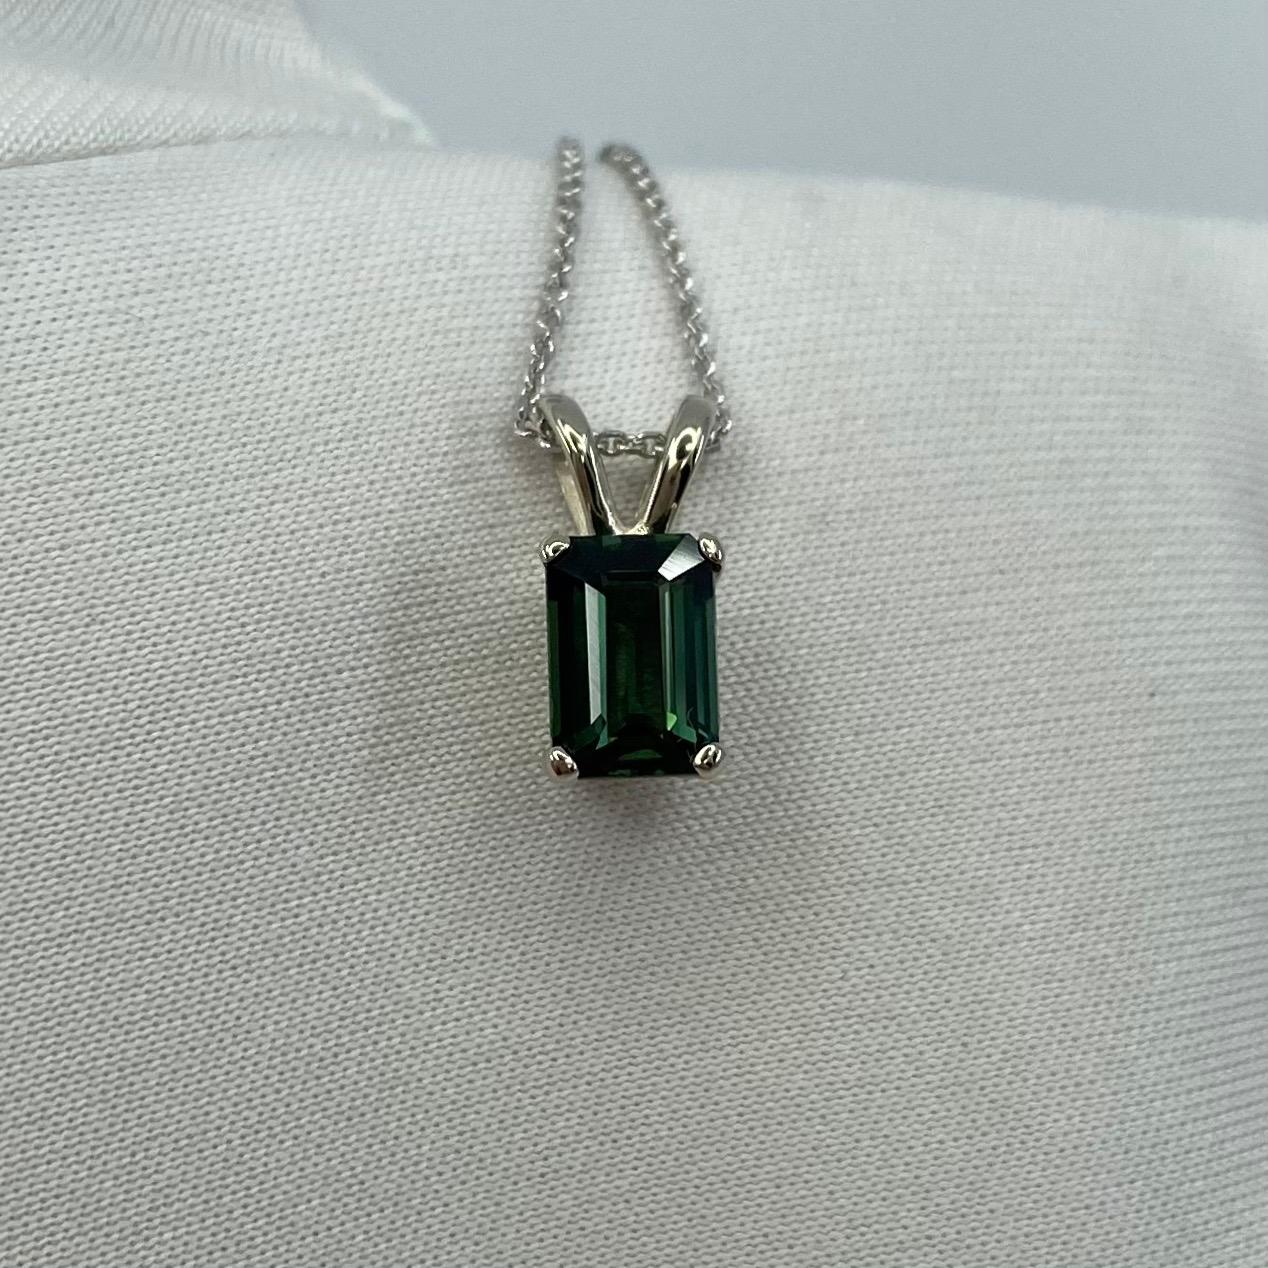 Deep Greenish Blue Thai Sapphire White Gold Solitaire Pendant Necklace.

1.13 Carat Thailand sapphire with a stunning deep greenish blue colour and an excellent emerald cut. Also has excellent clarity, very clean stone.. Set in a fine 14k white gold